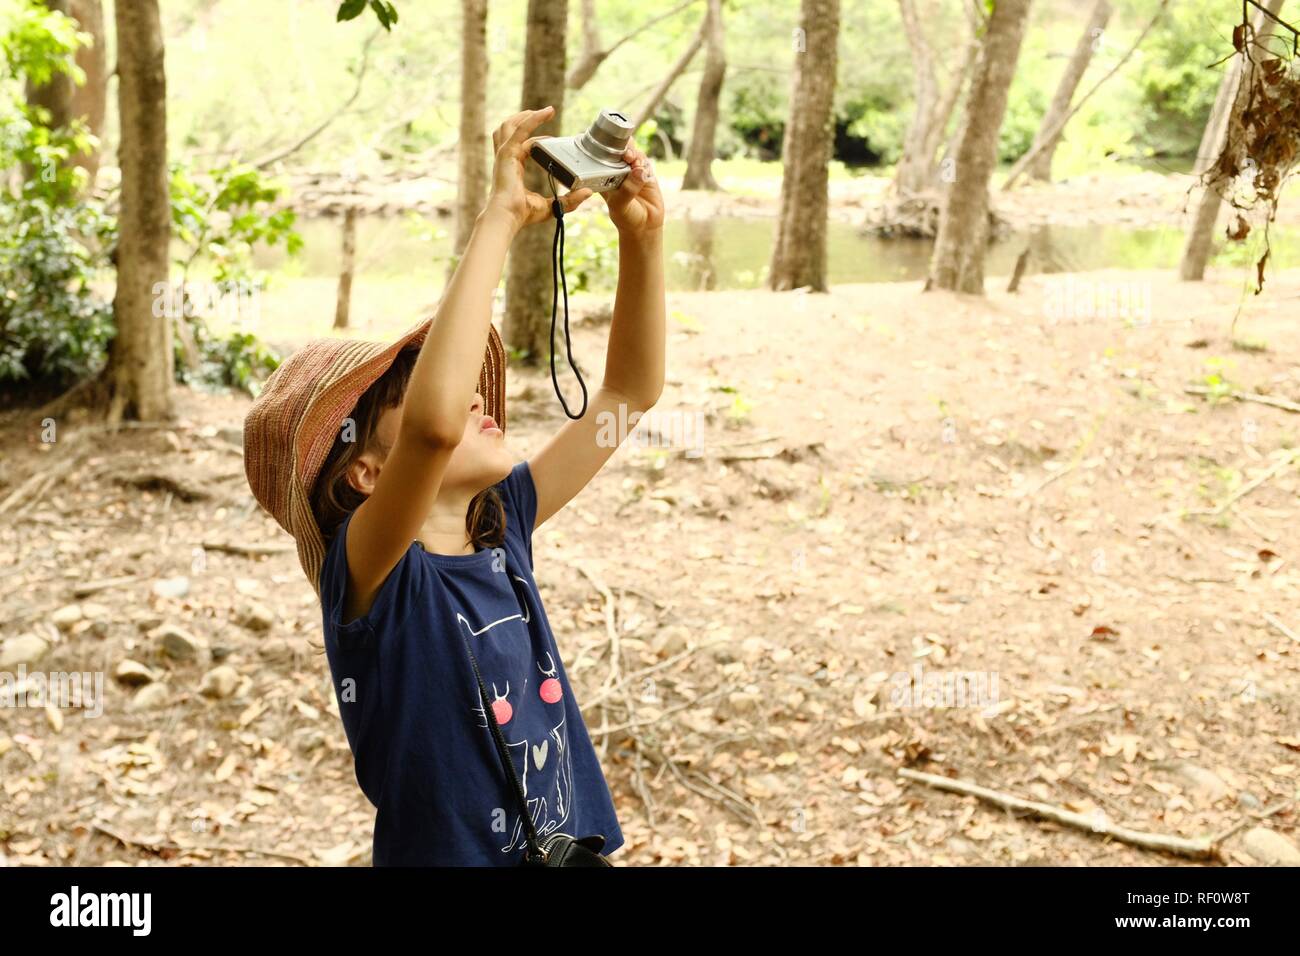 A young girl using a camera to take a photo in nature, Mia Mia State Forest, Queensland, Australia Stock Photo